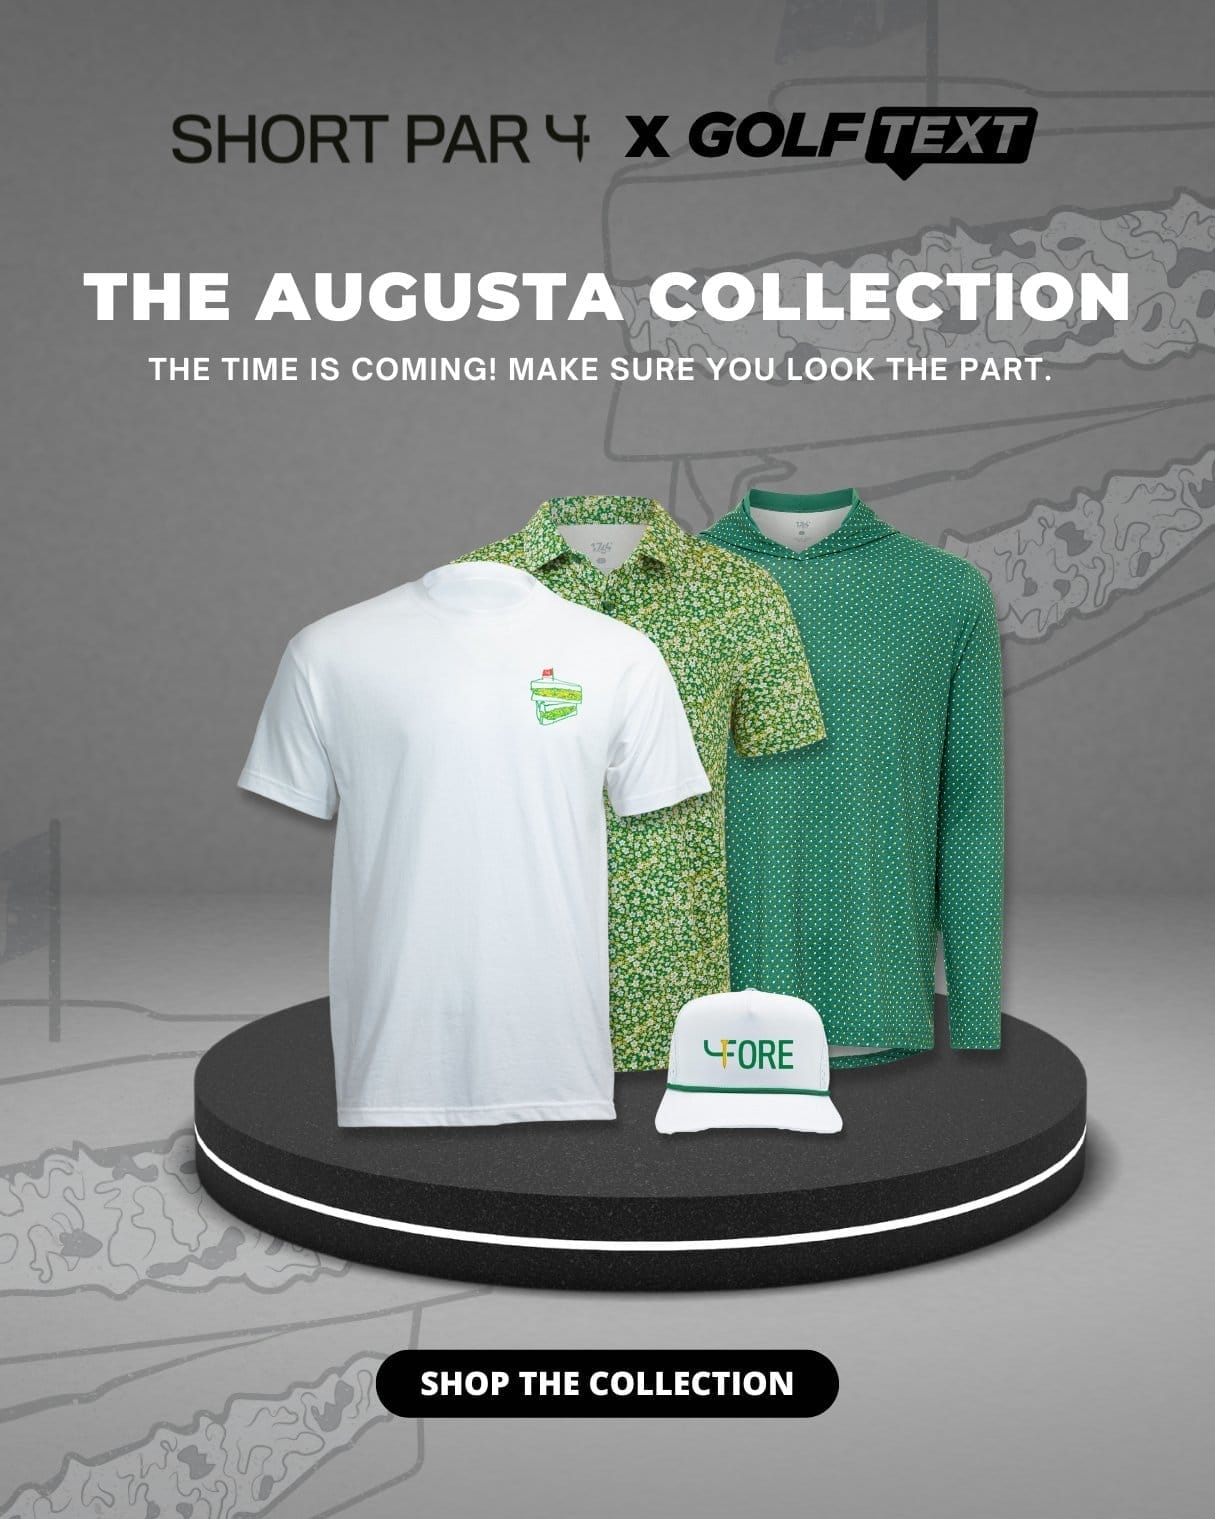 The Augusta Collection at GolfText